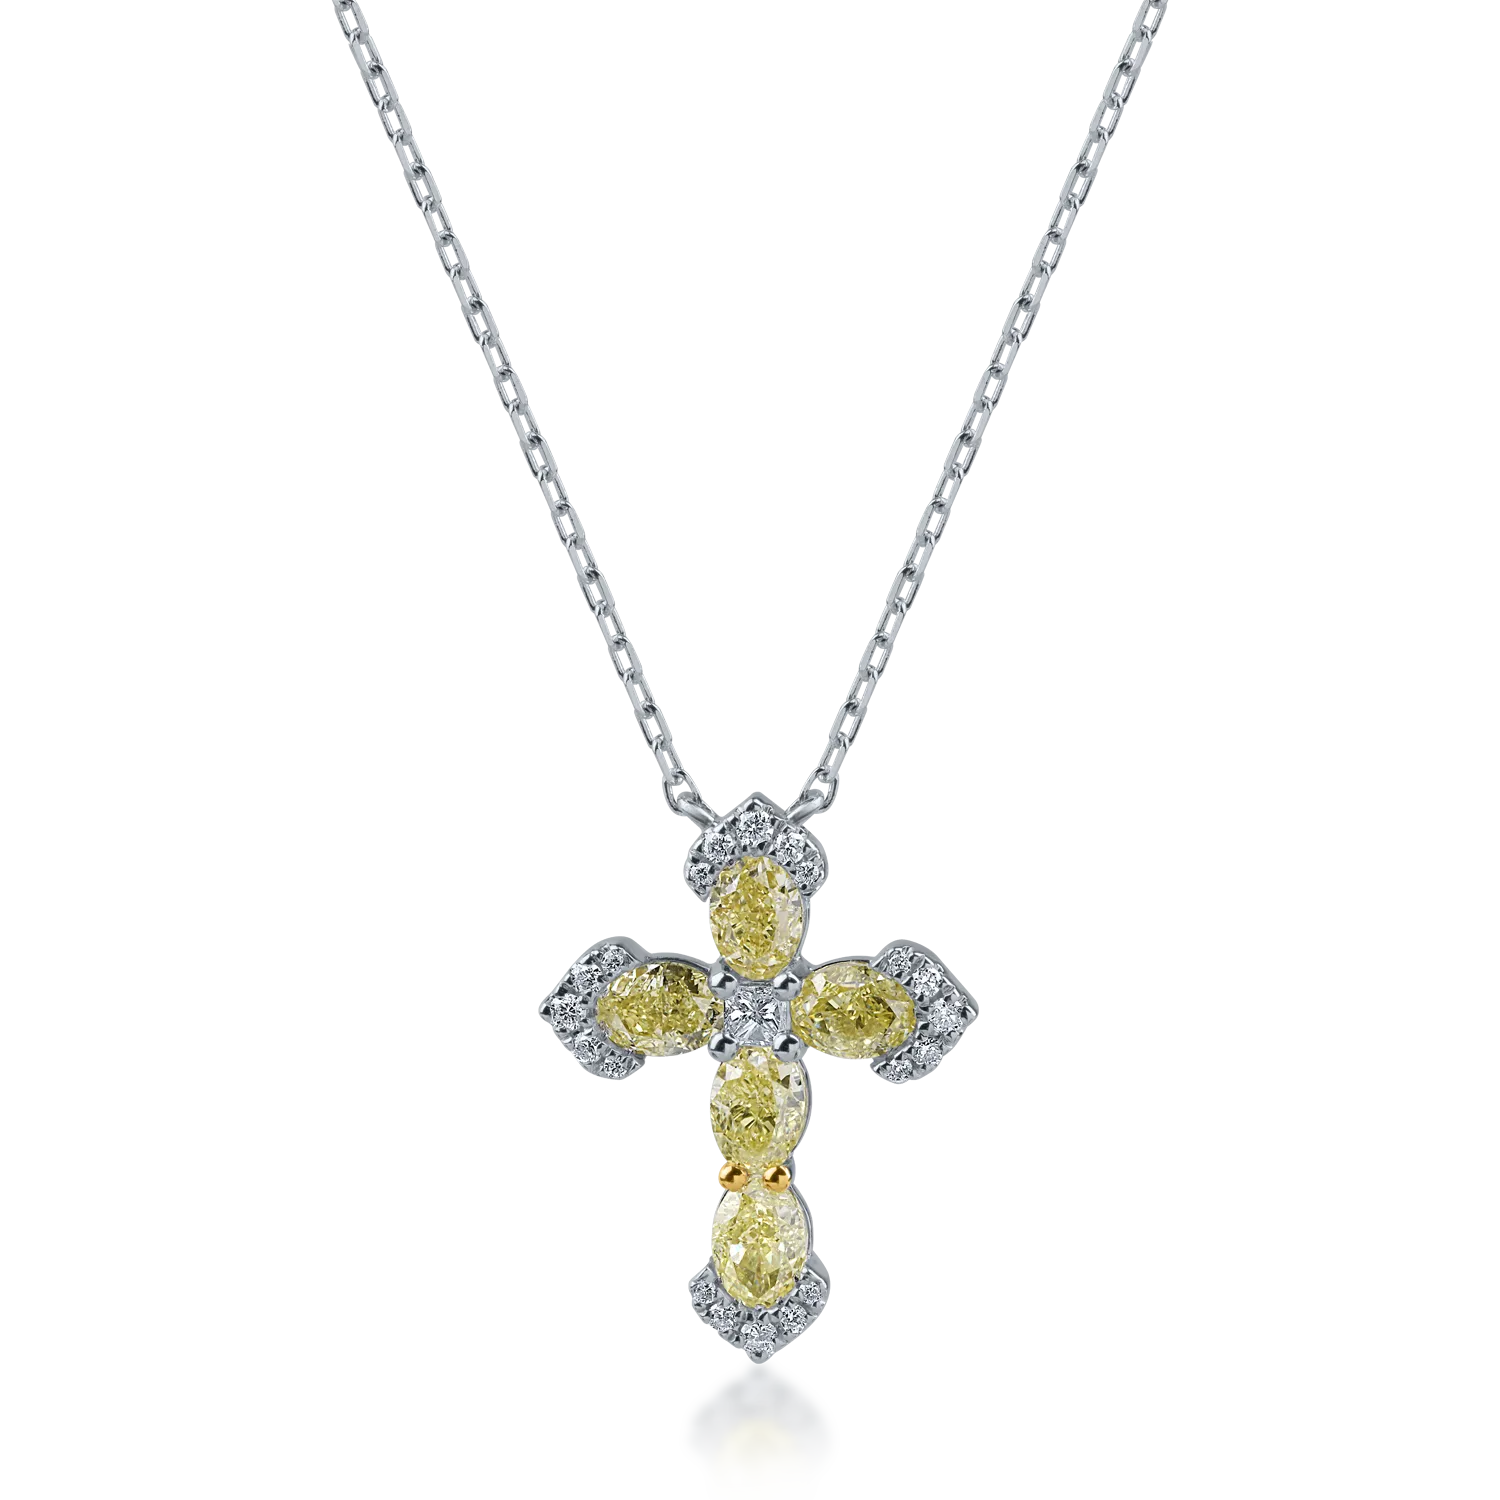 White gold cross pendant necklace with 1.25ct yellow diamonds and 0.13ct clear diamonds